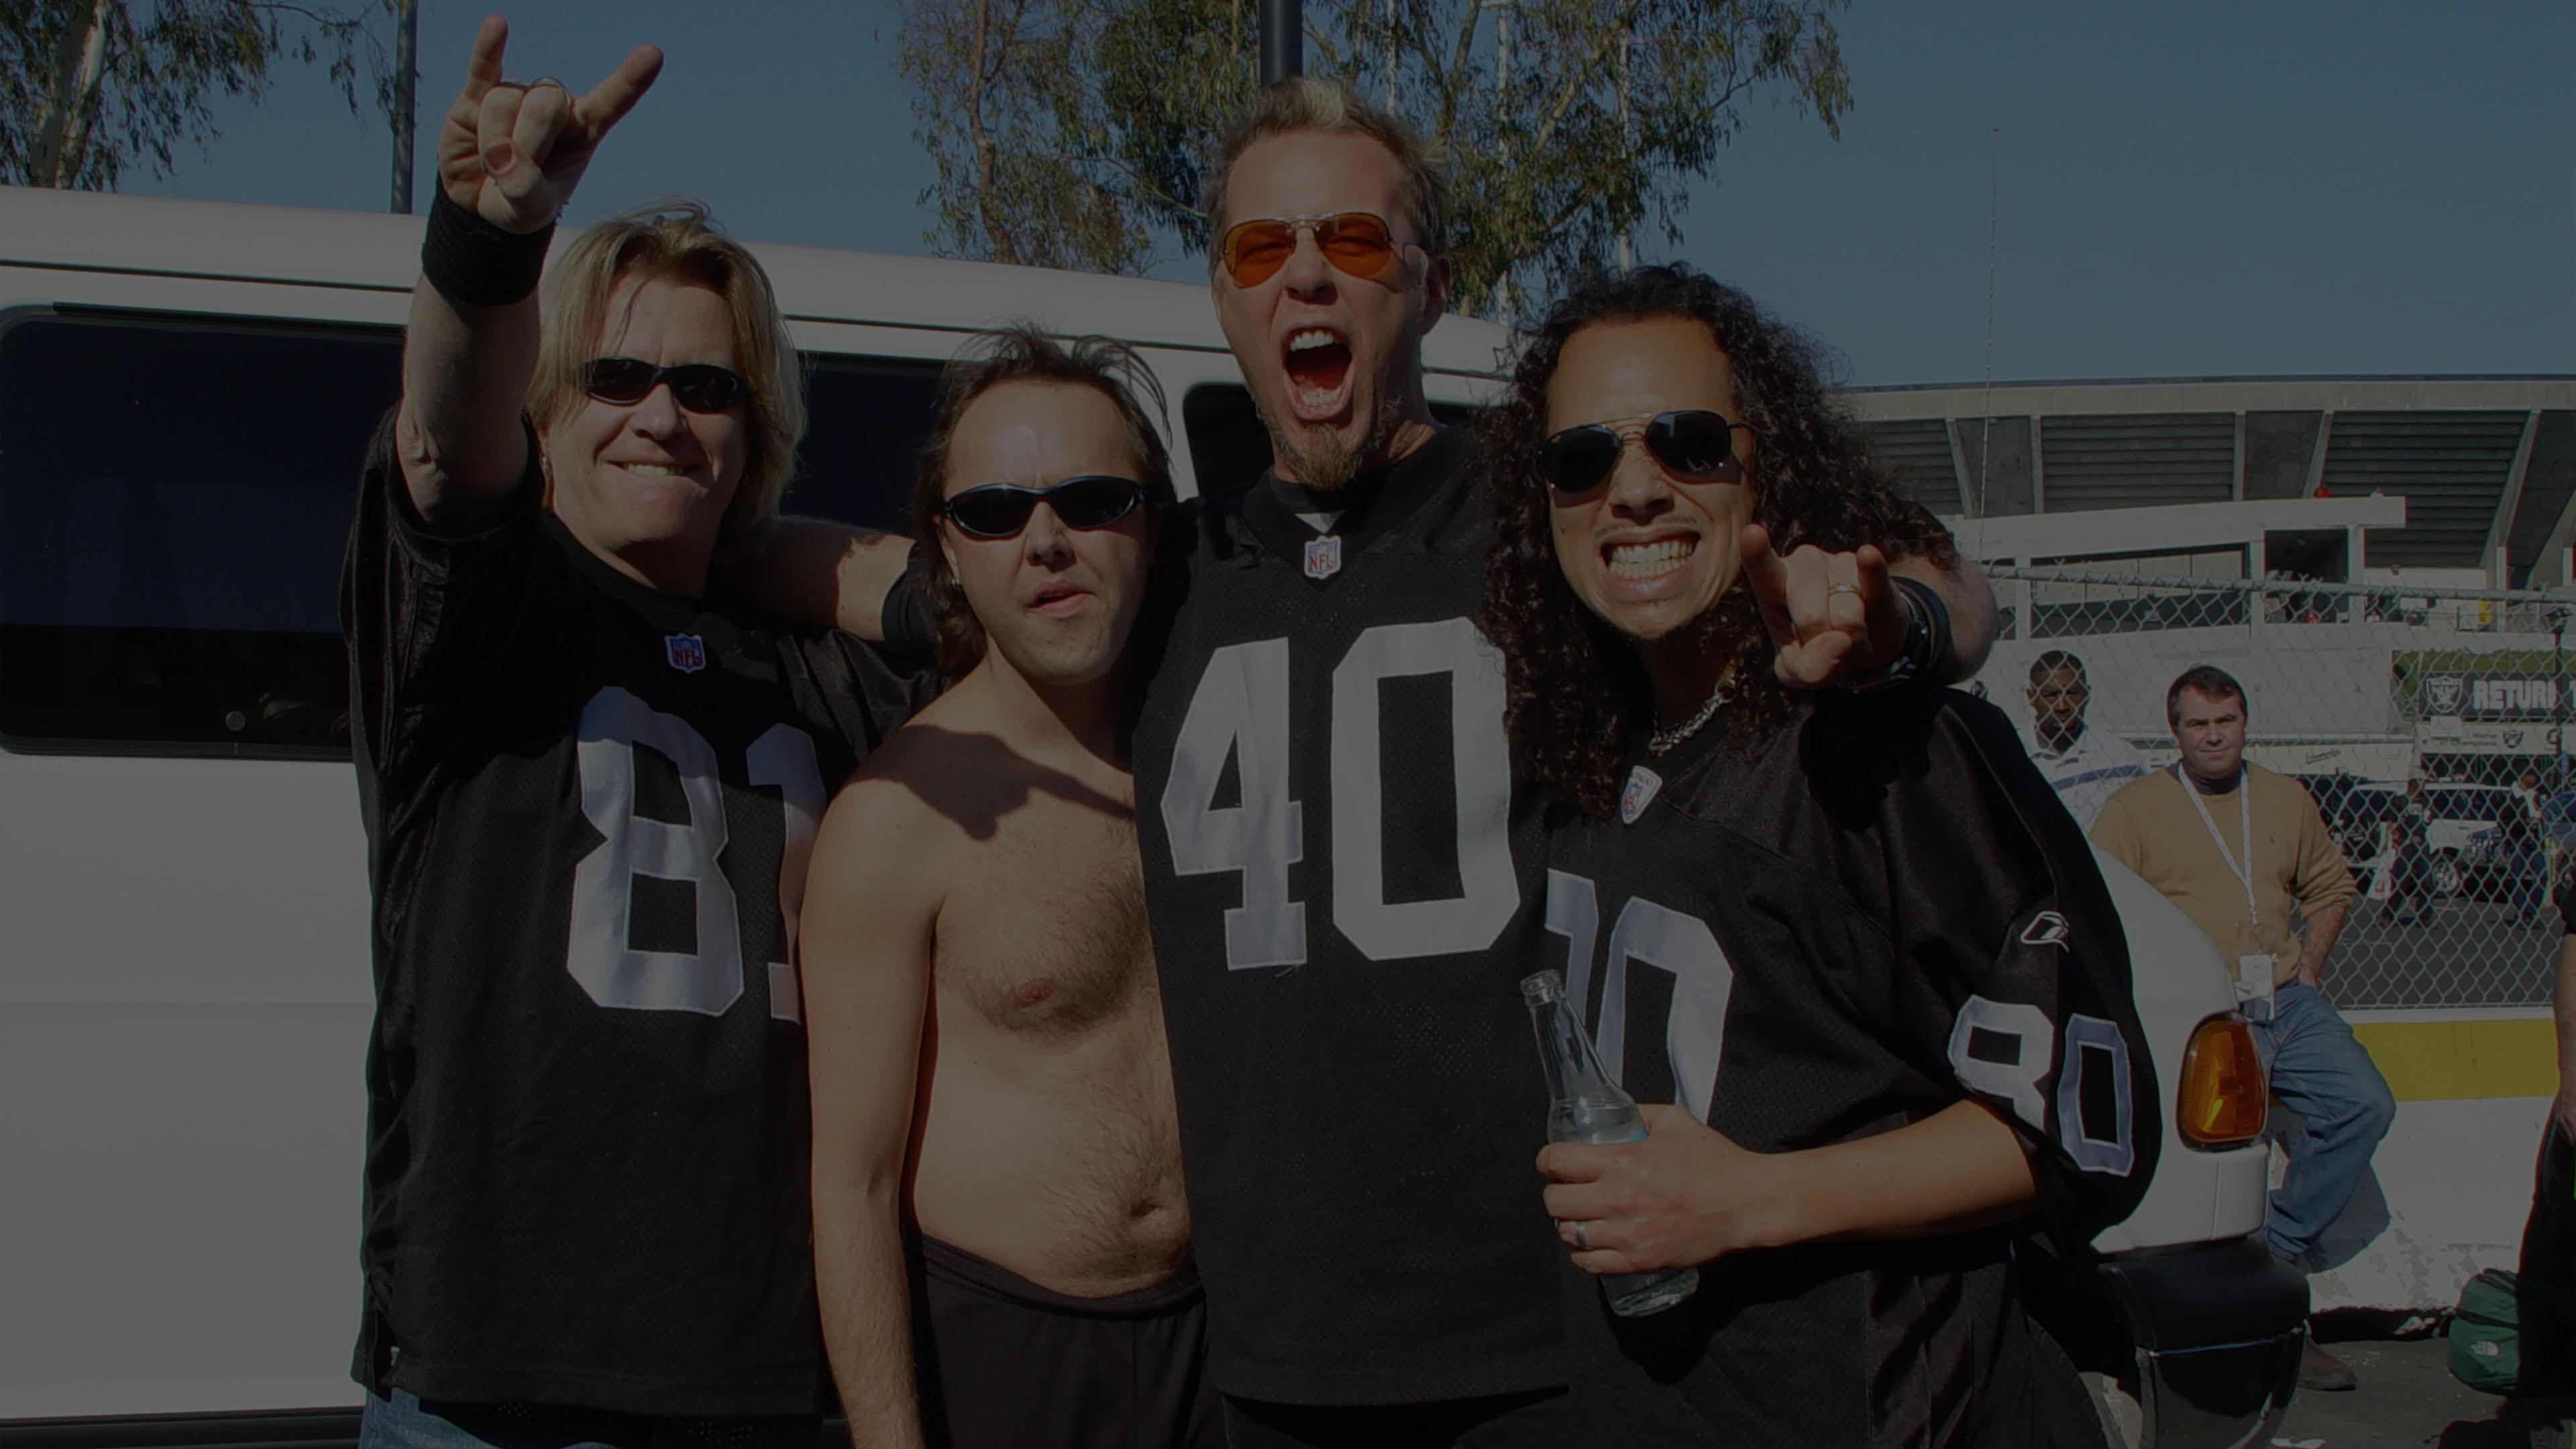 Metallica at Network Associates Coliseum Parking Lot in Oakland, CA on January 19, 2003